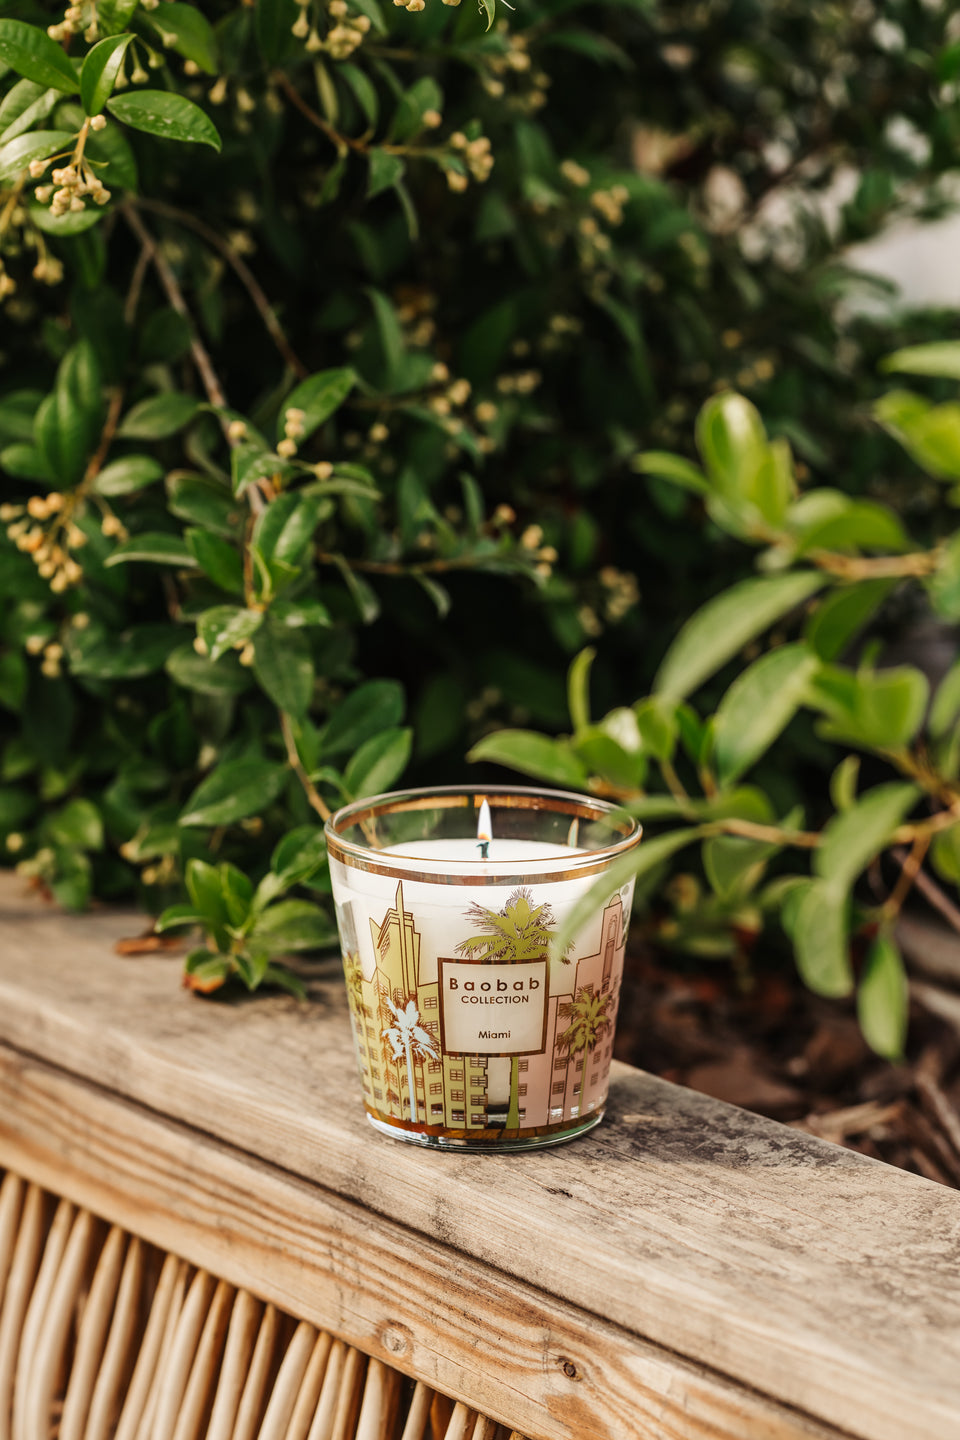 Baobab Candle my first baobab Miami, "my first baobab candle Max 08, baobab candles Miami, small candles baobab candles, miami candle, "my first baobab candle, fresh candles, small candles, Home decor, Max 08 Candles